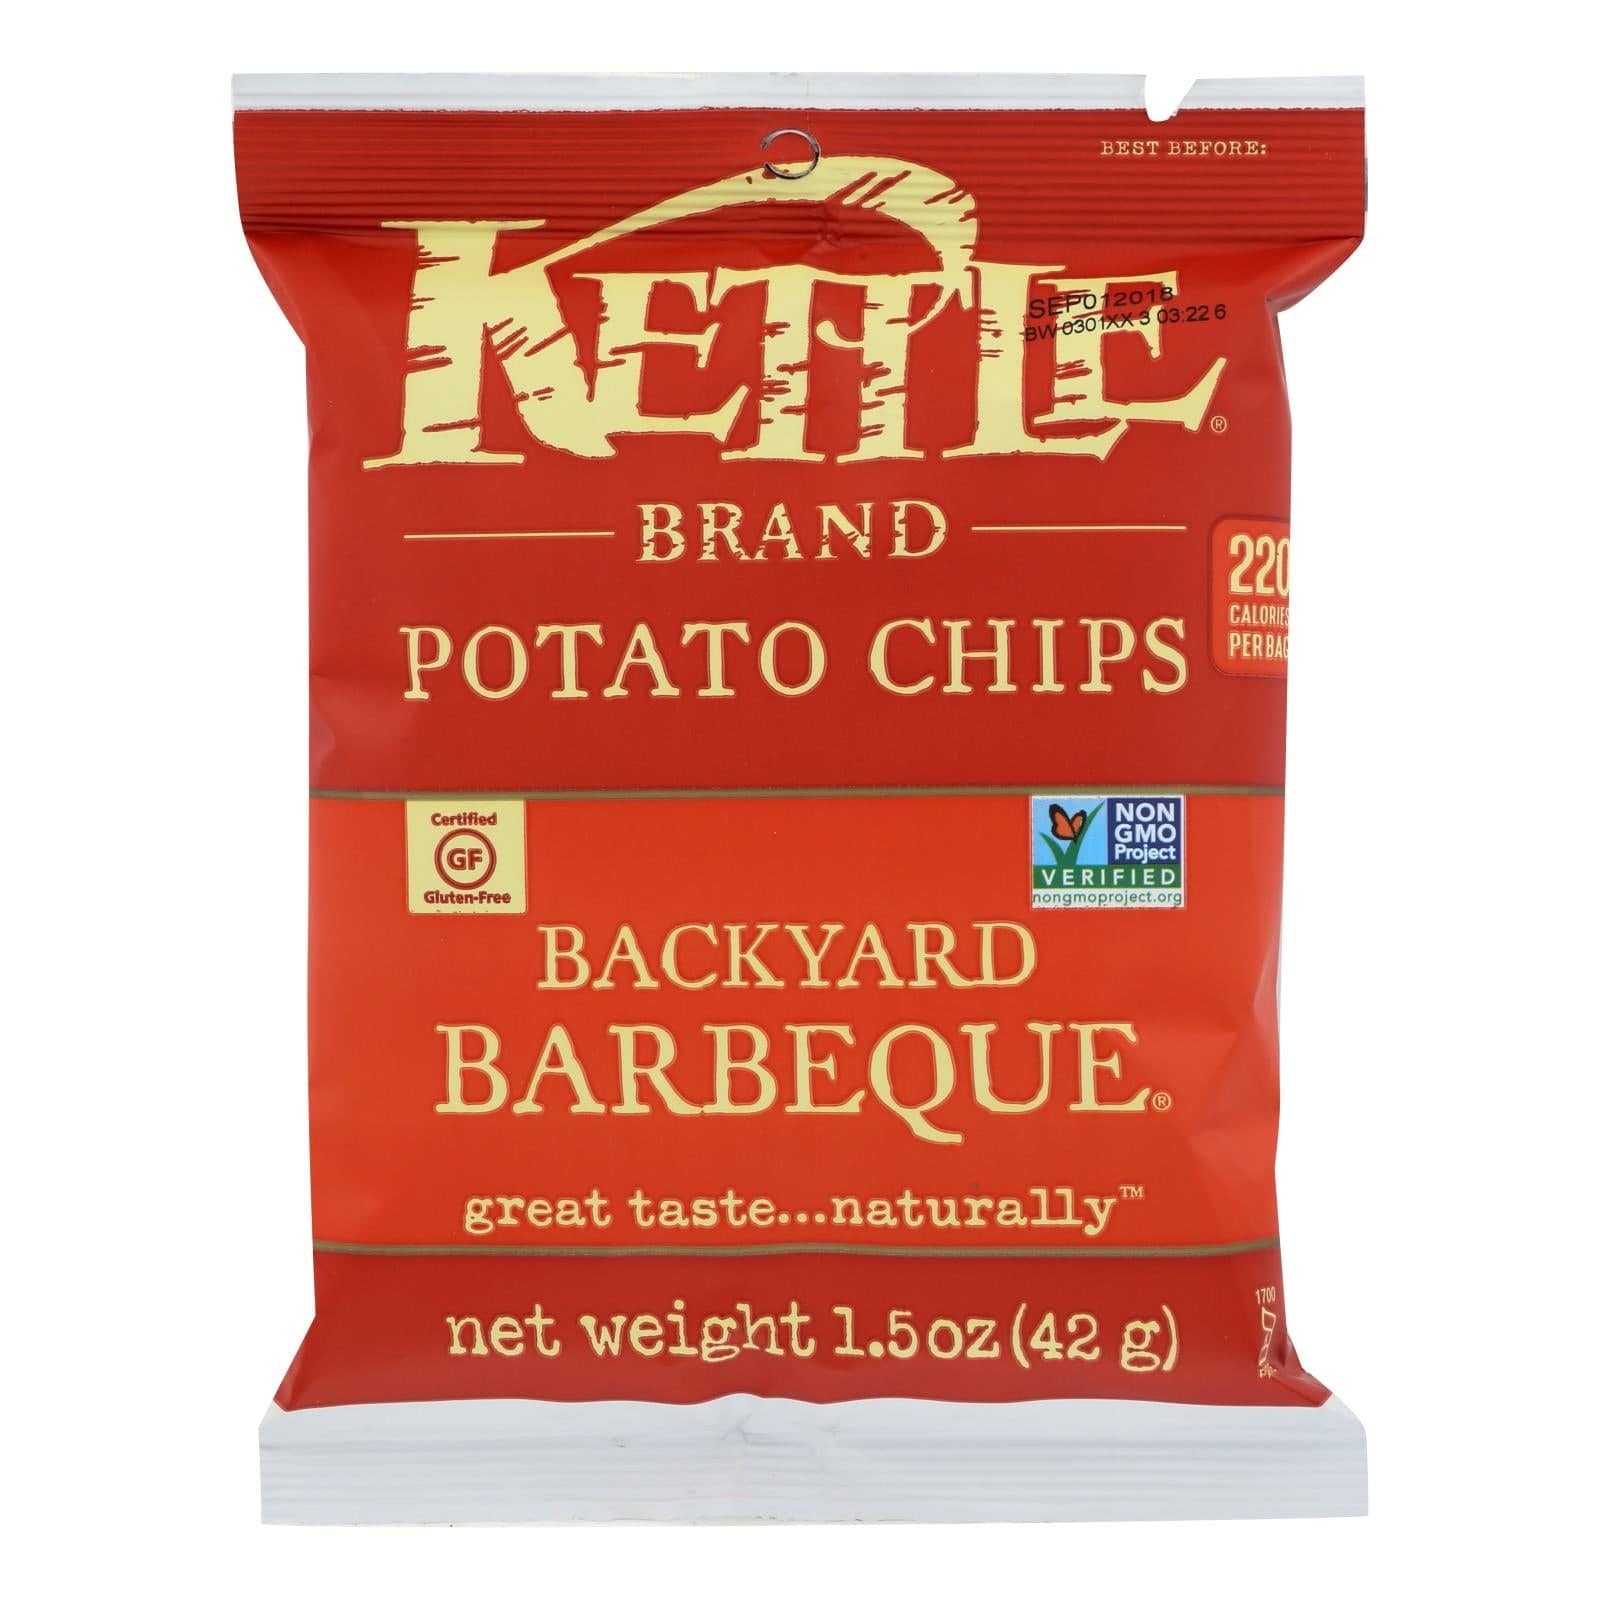 Buy Kettle Brand Potato Chips - Backyard Barbeque - 1.5 Oz - Case Of 24  at OnlyNaturals.us